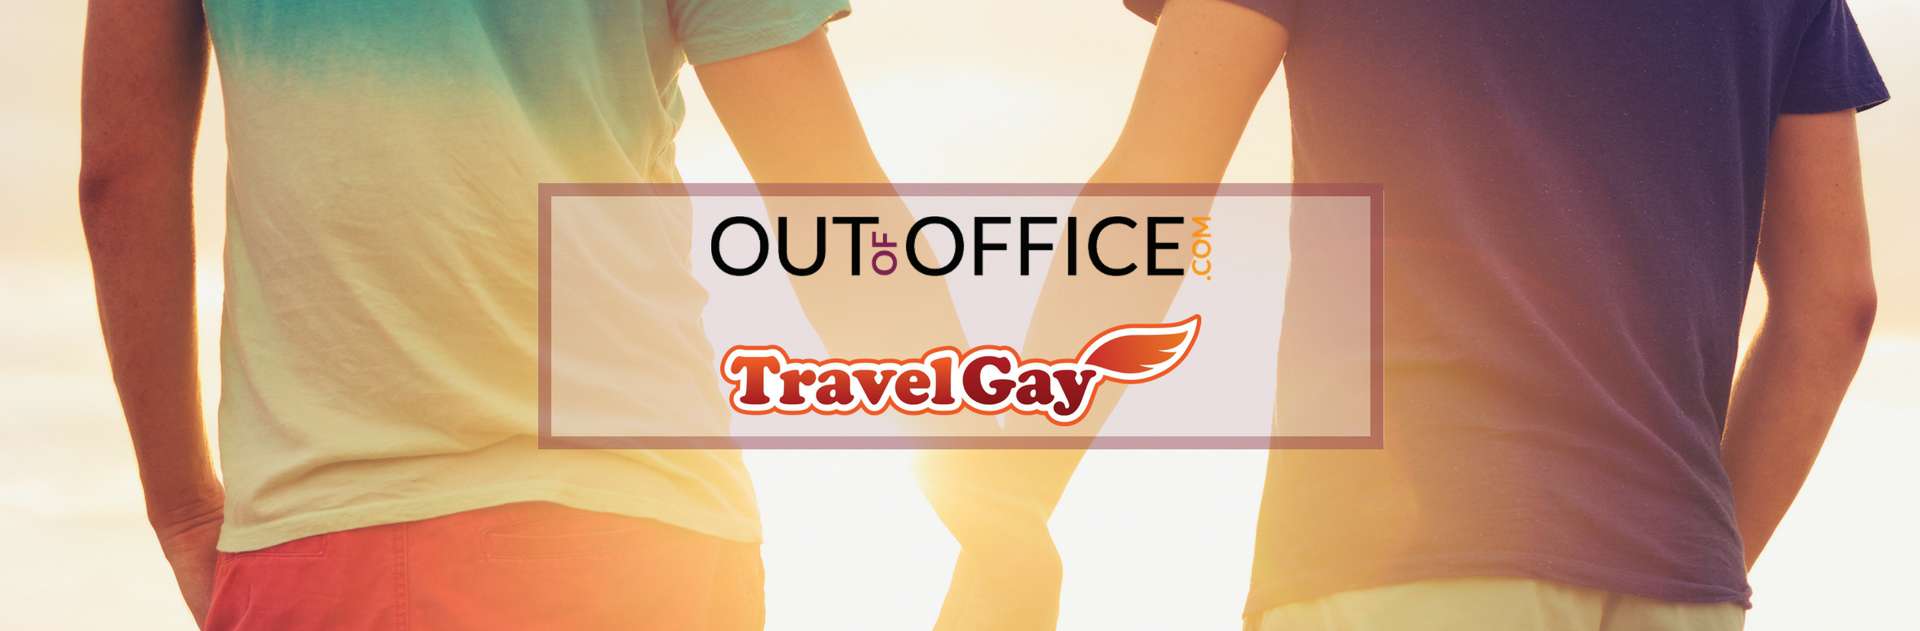 best of About gay travel Out